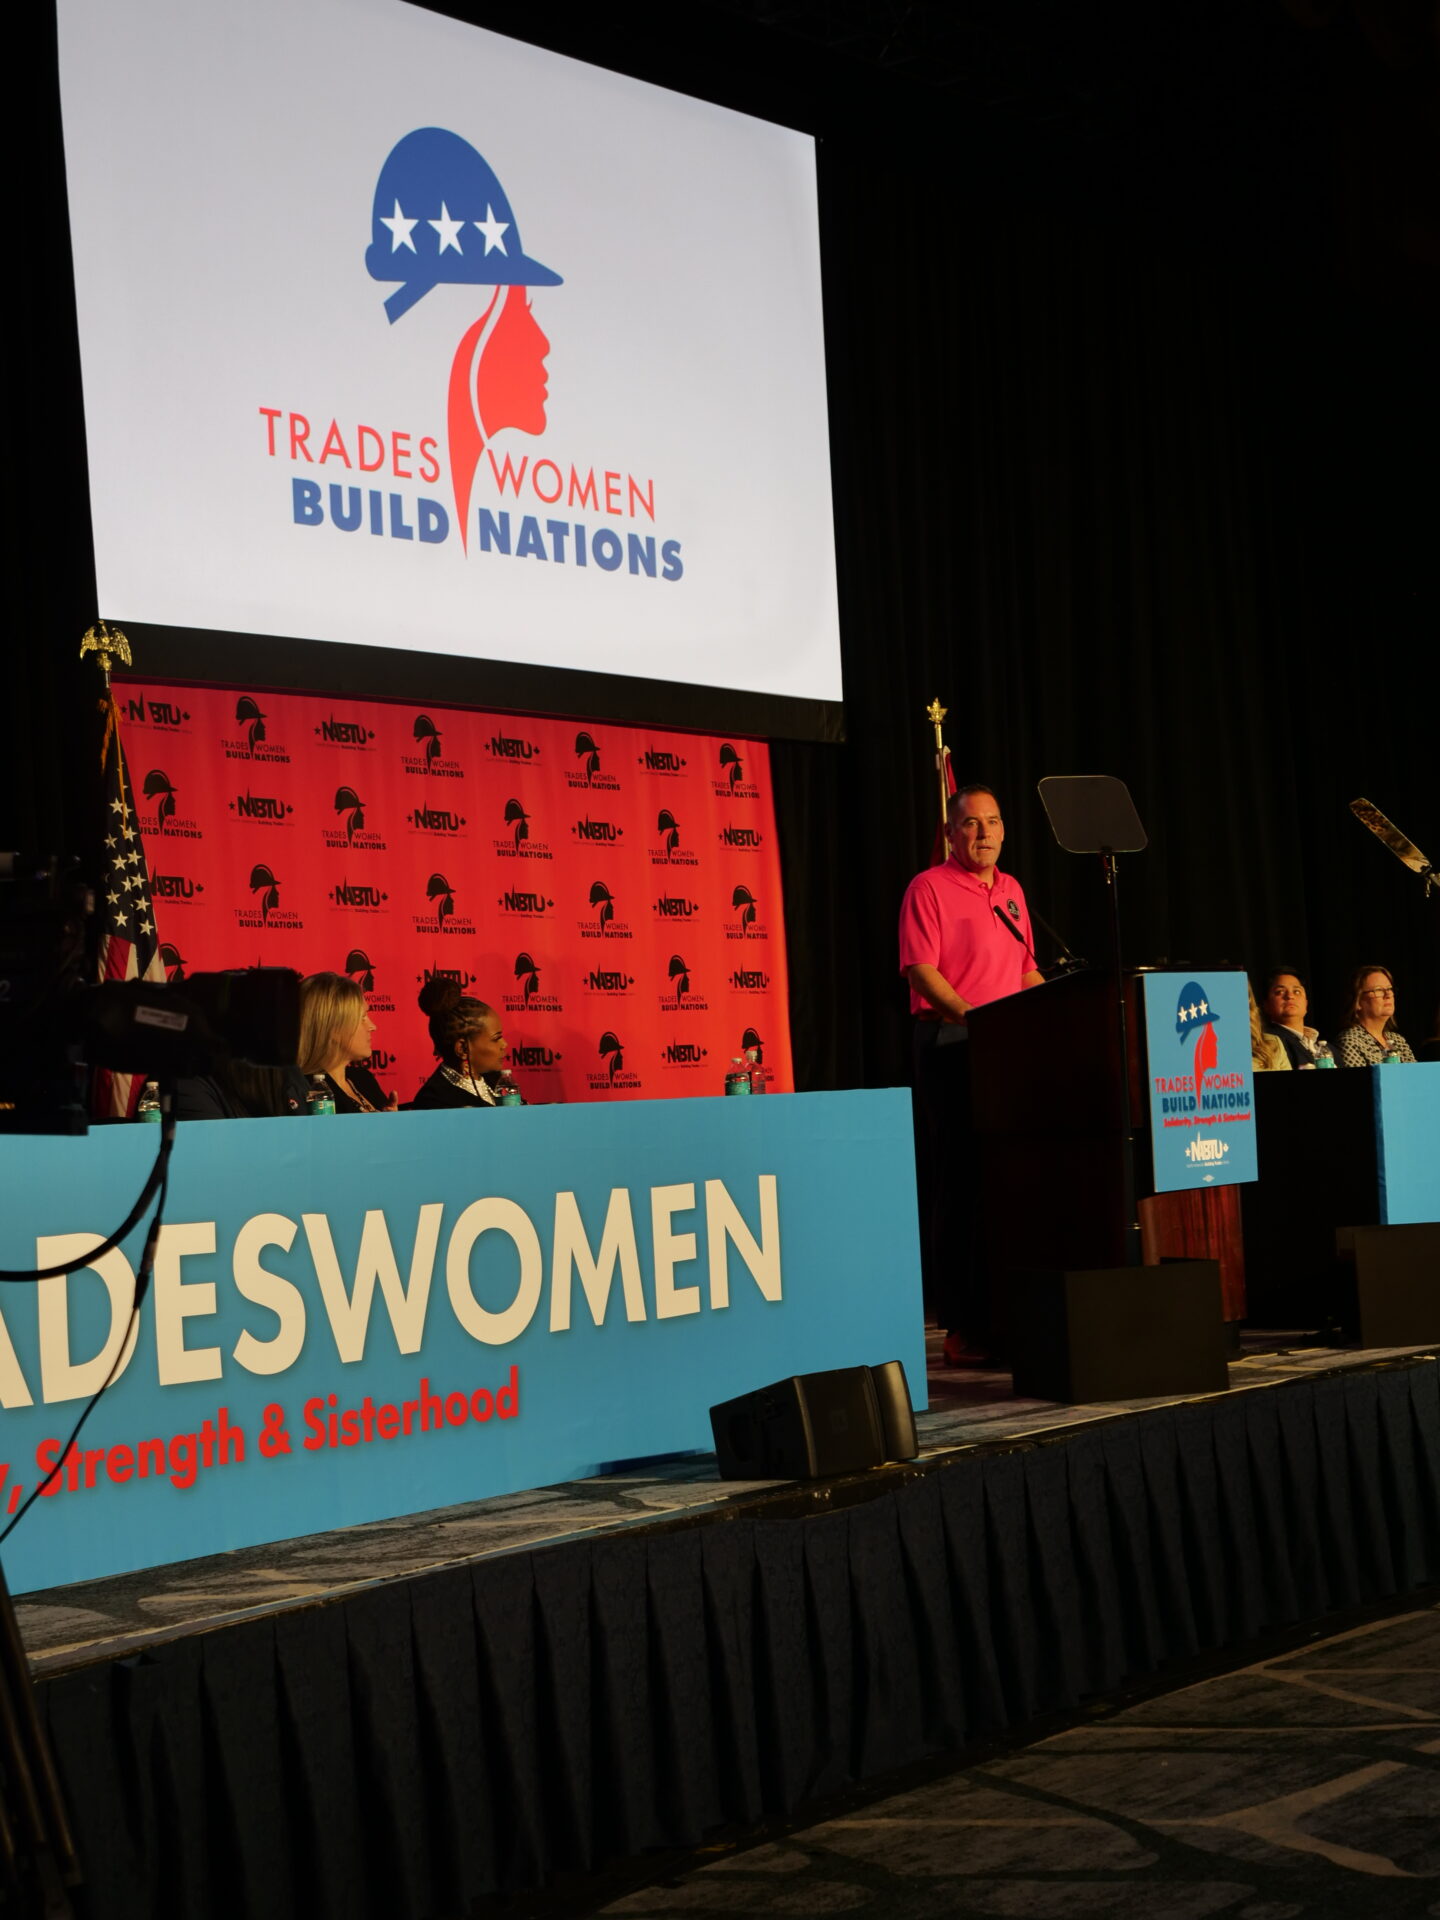 Image from the Gallery: Trades Women Build Nations